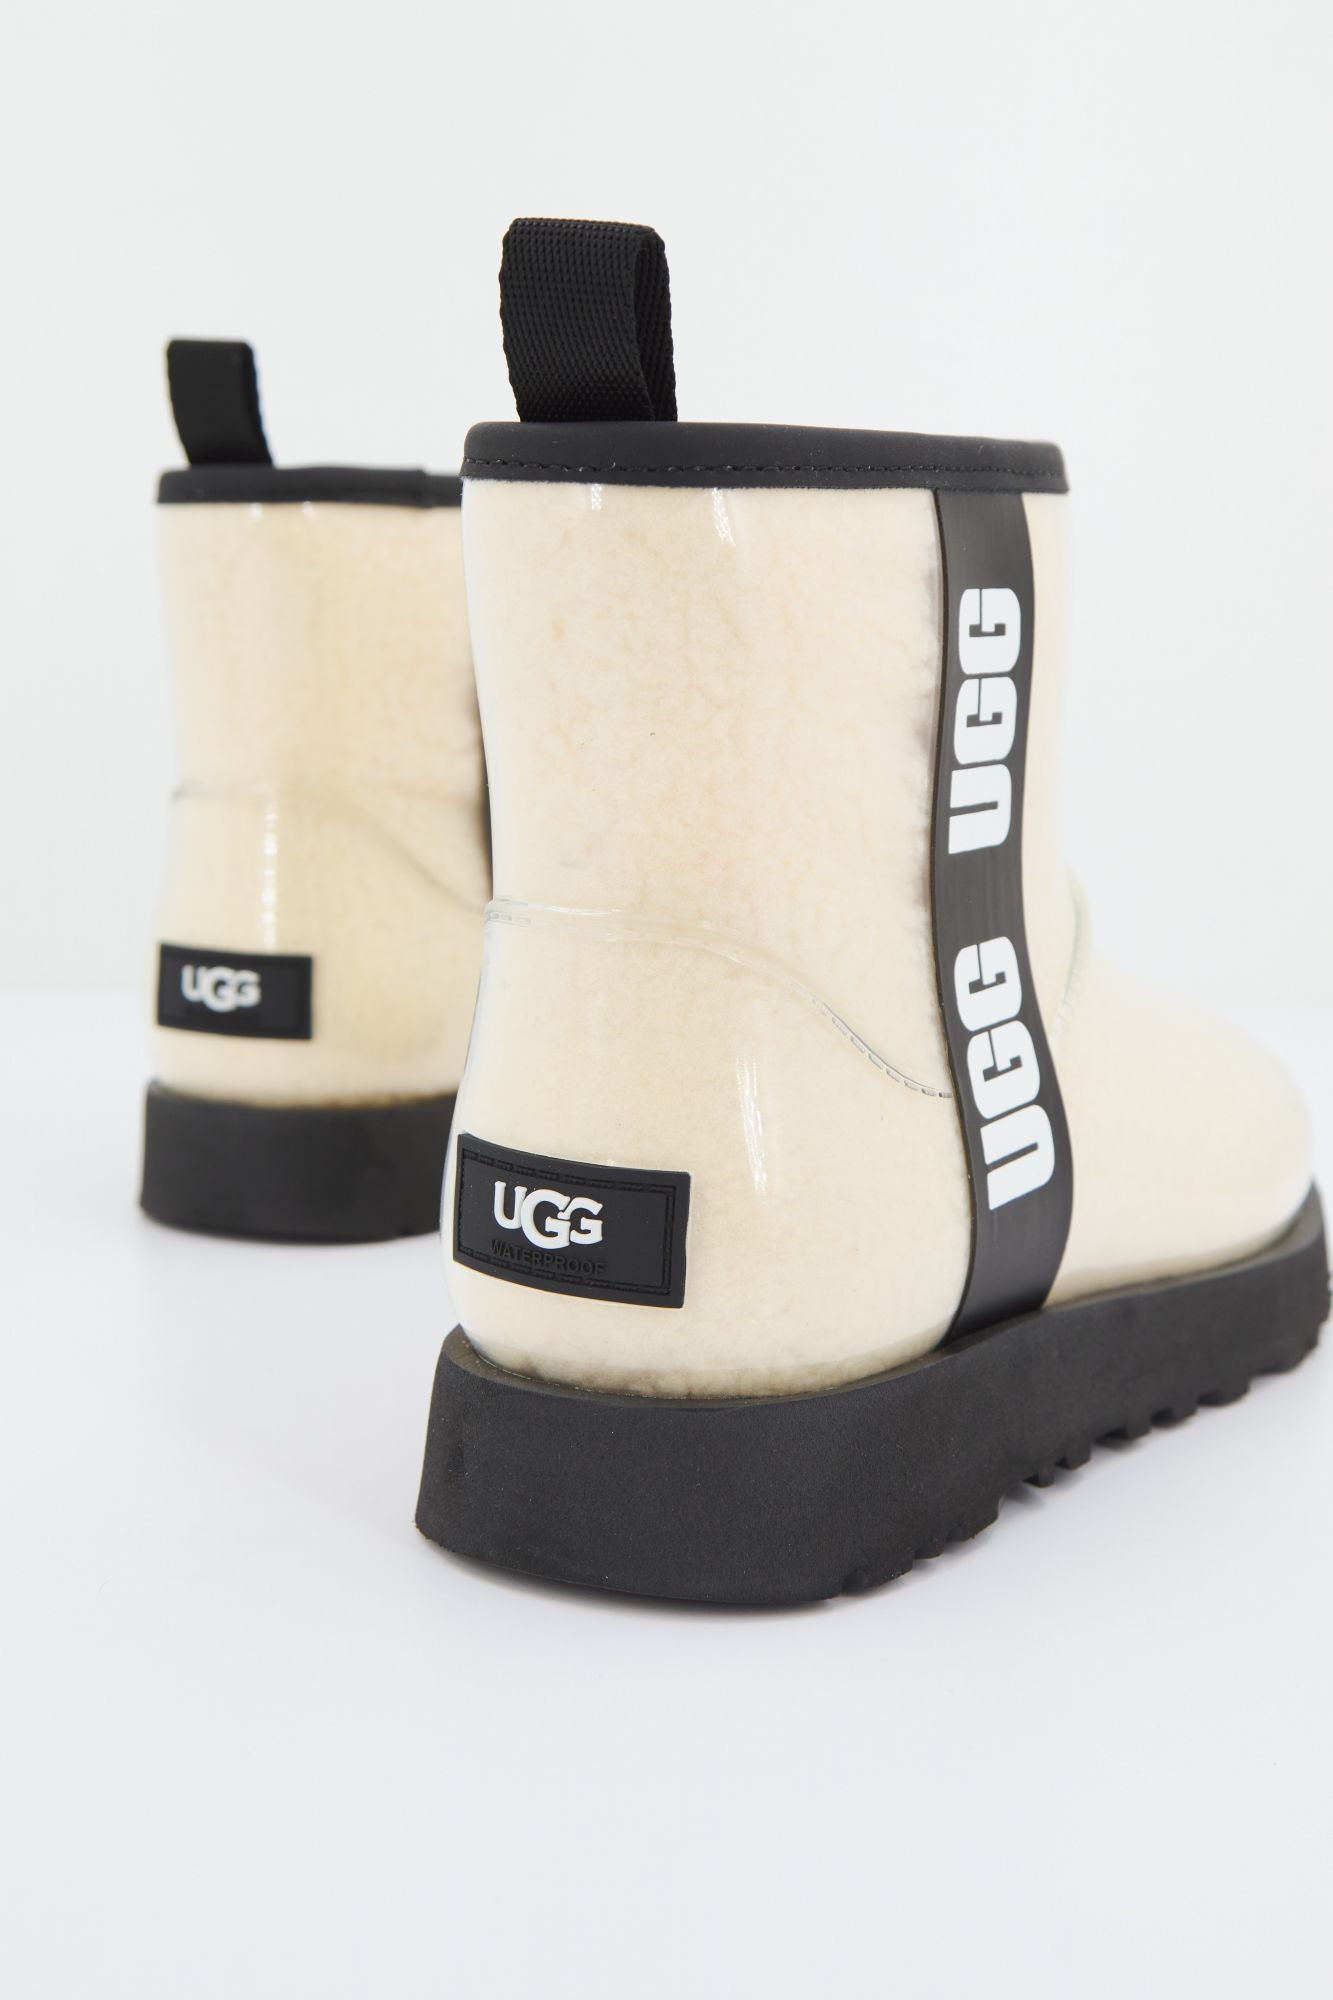 UGG CLASSIC CLEAR MINI en color BEIS (3)